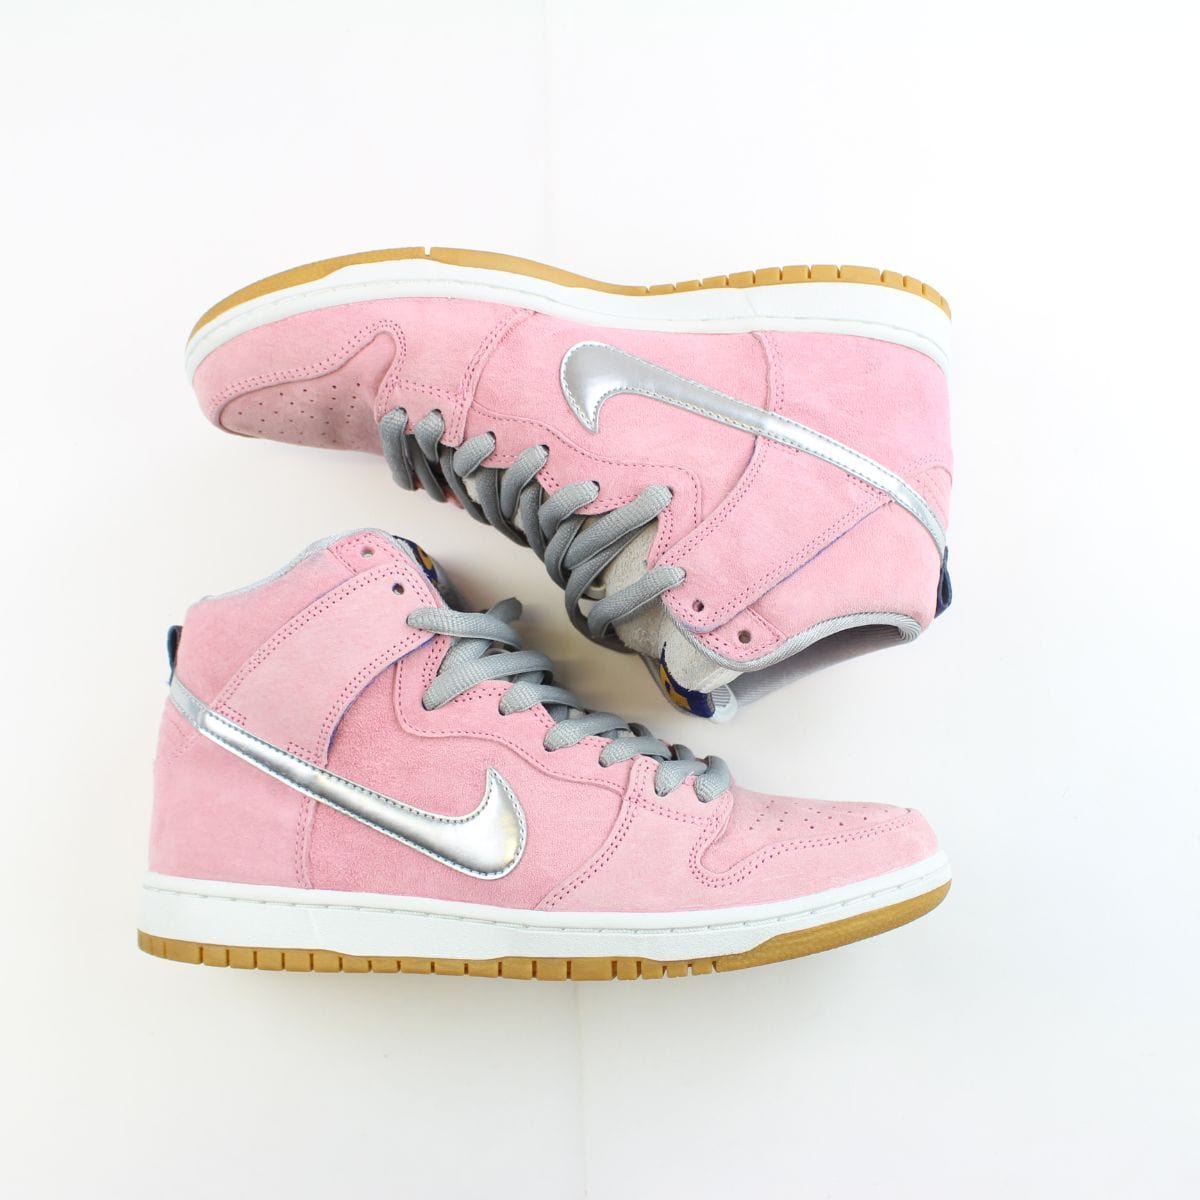 Nike x Concepts Dunk High When Pigs Fly - SaruGeneral